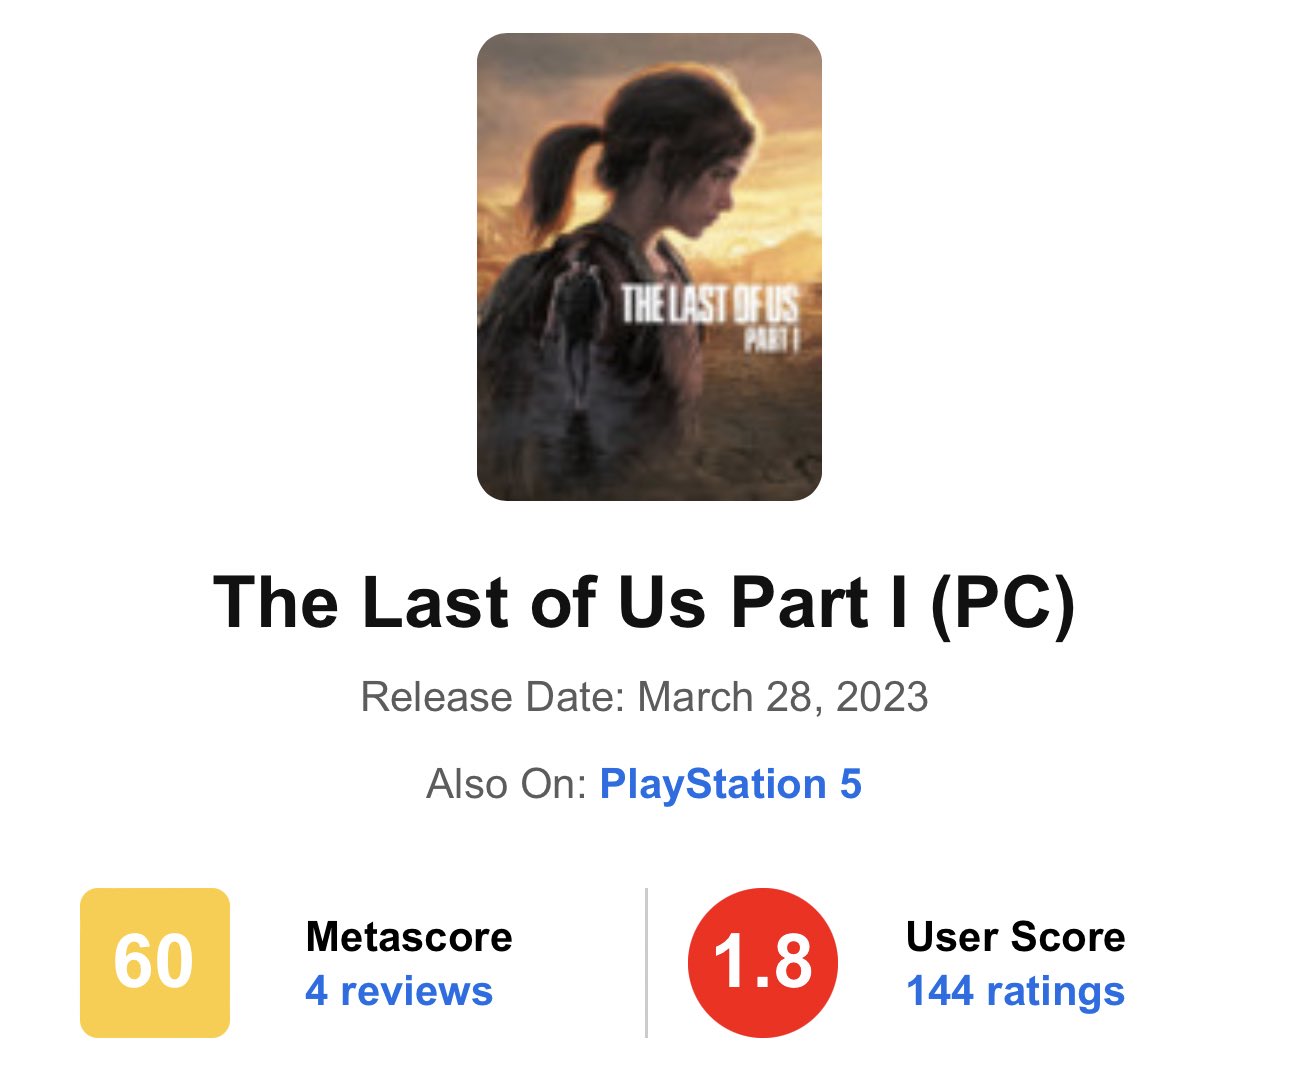 The Last of Us Part I arrives on PC March 28, 2023 [Update